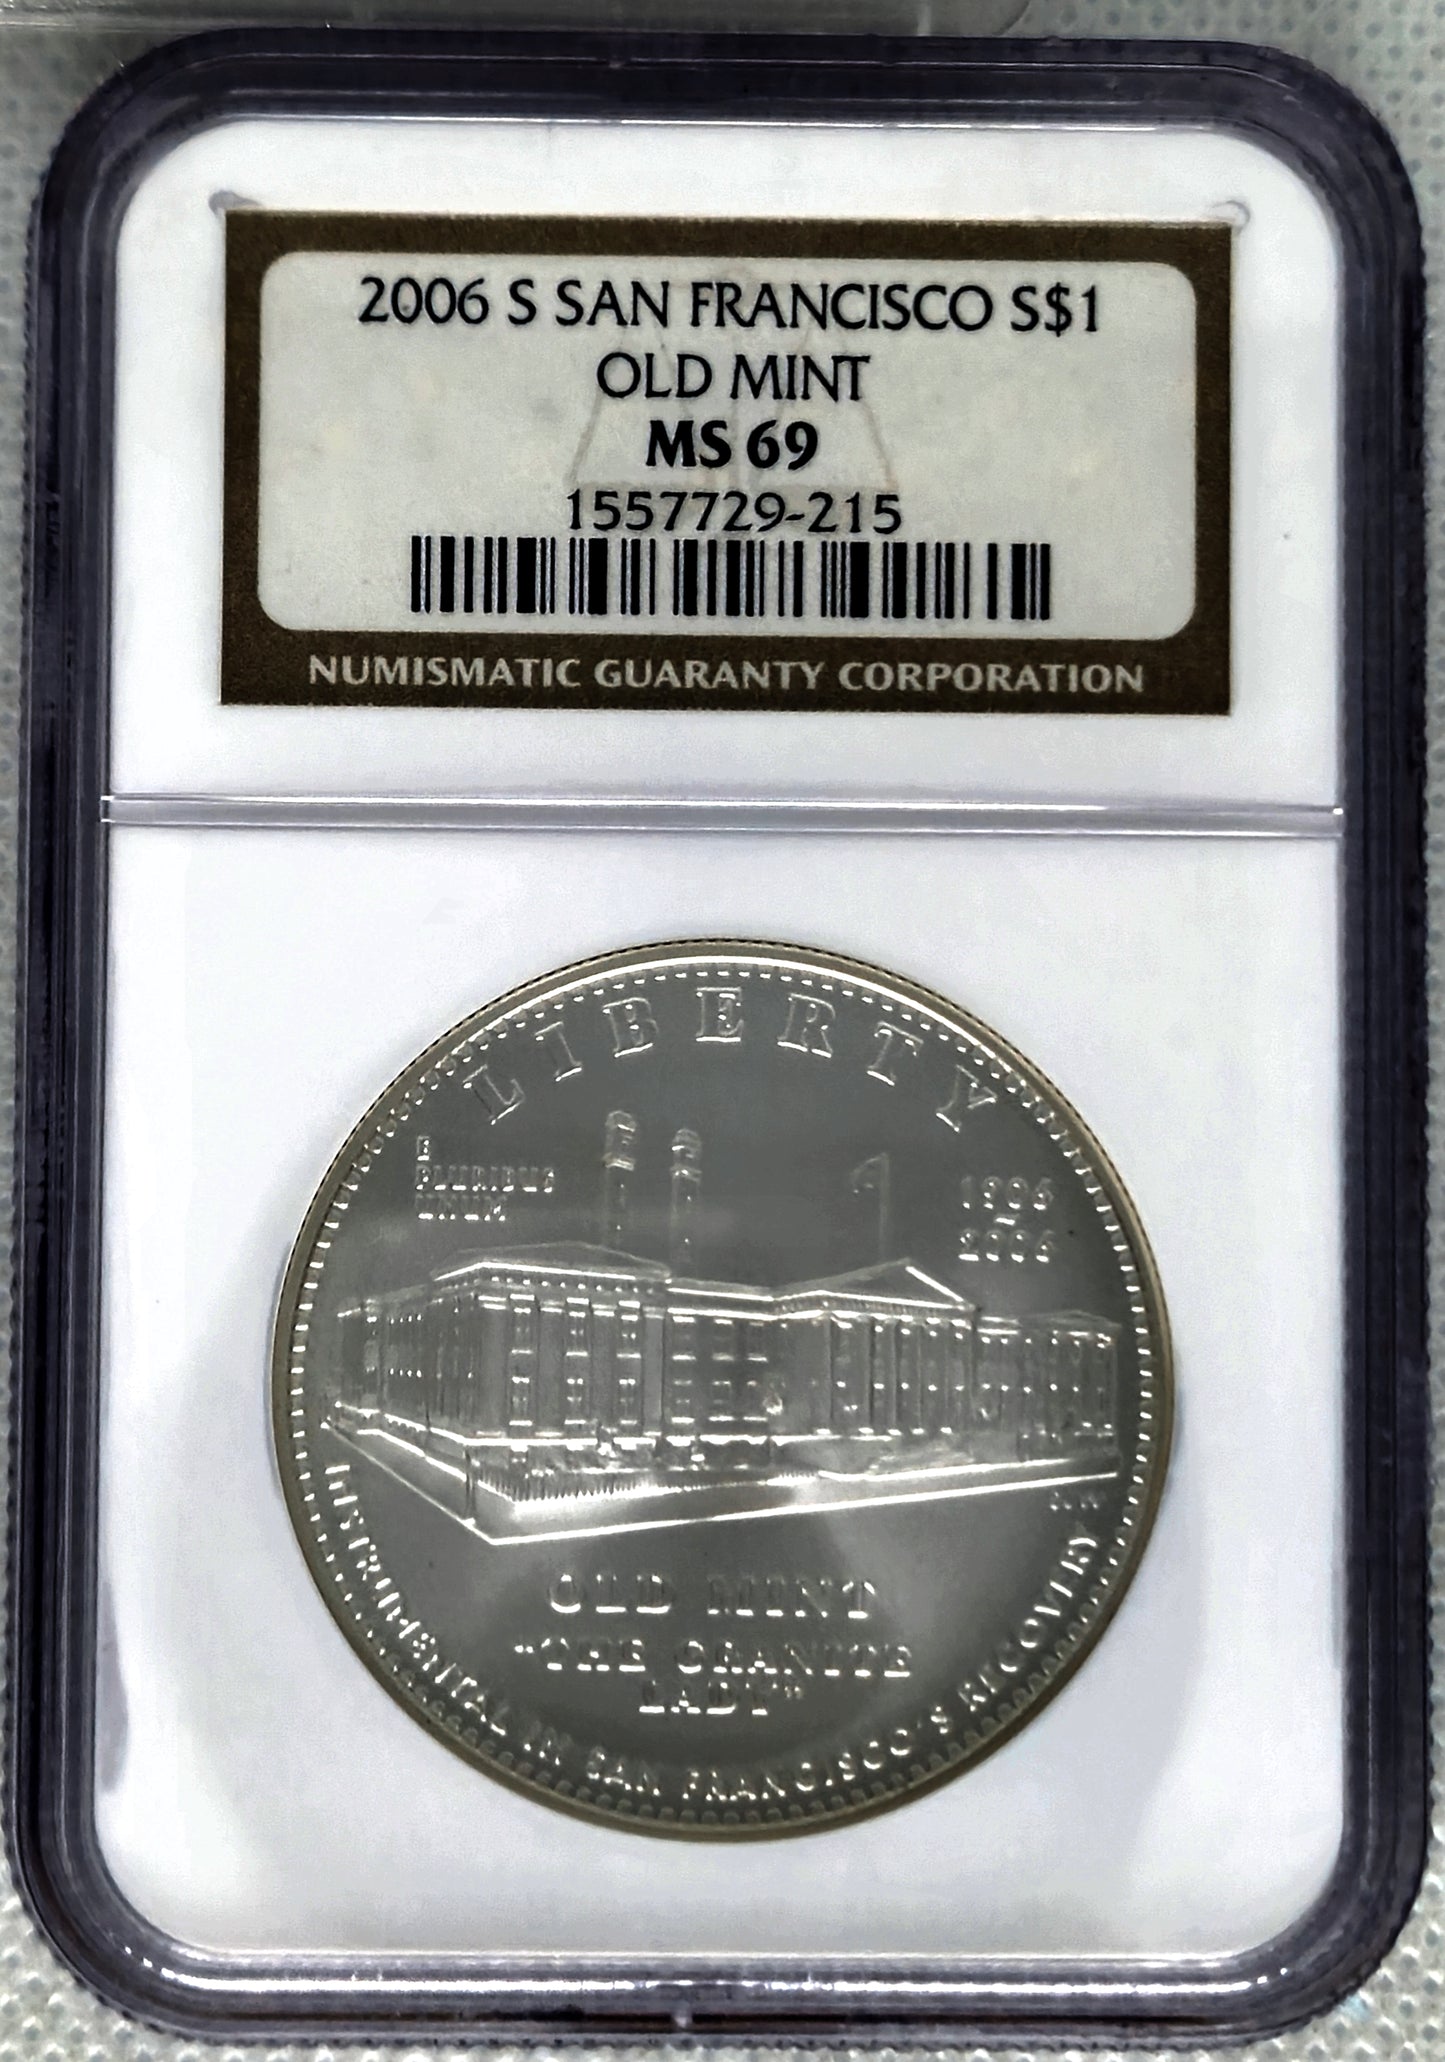 2006-S San Francisco Old Mint NGC MS 69 Commemorative SILVER DOLLAR